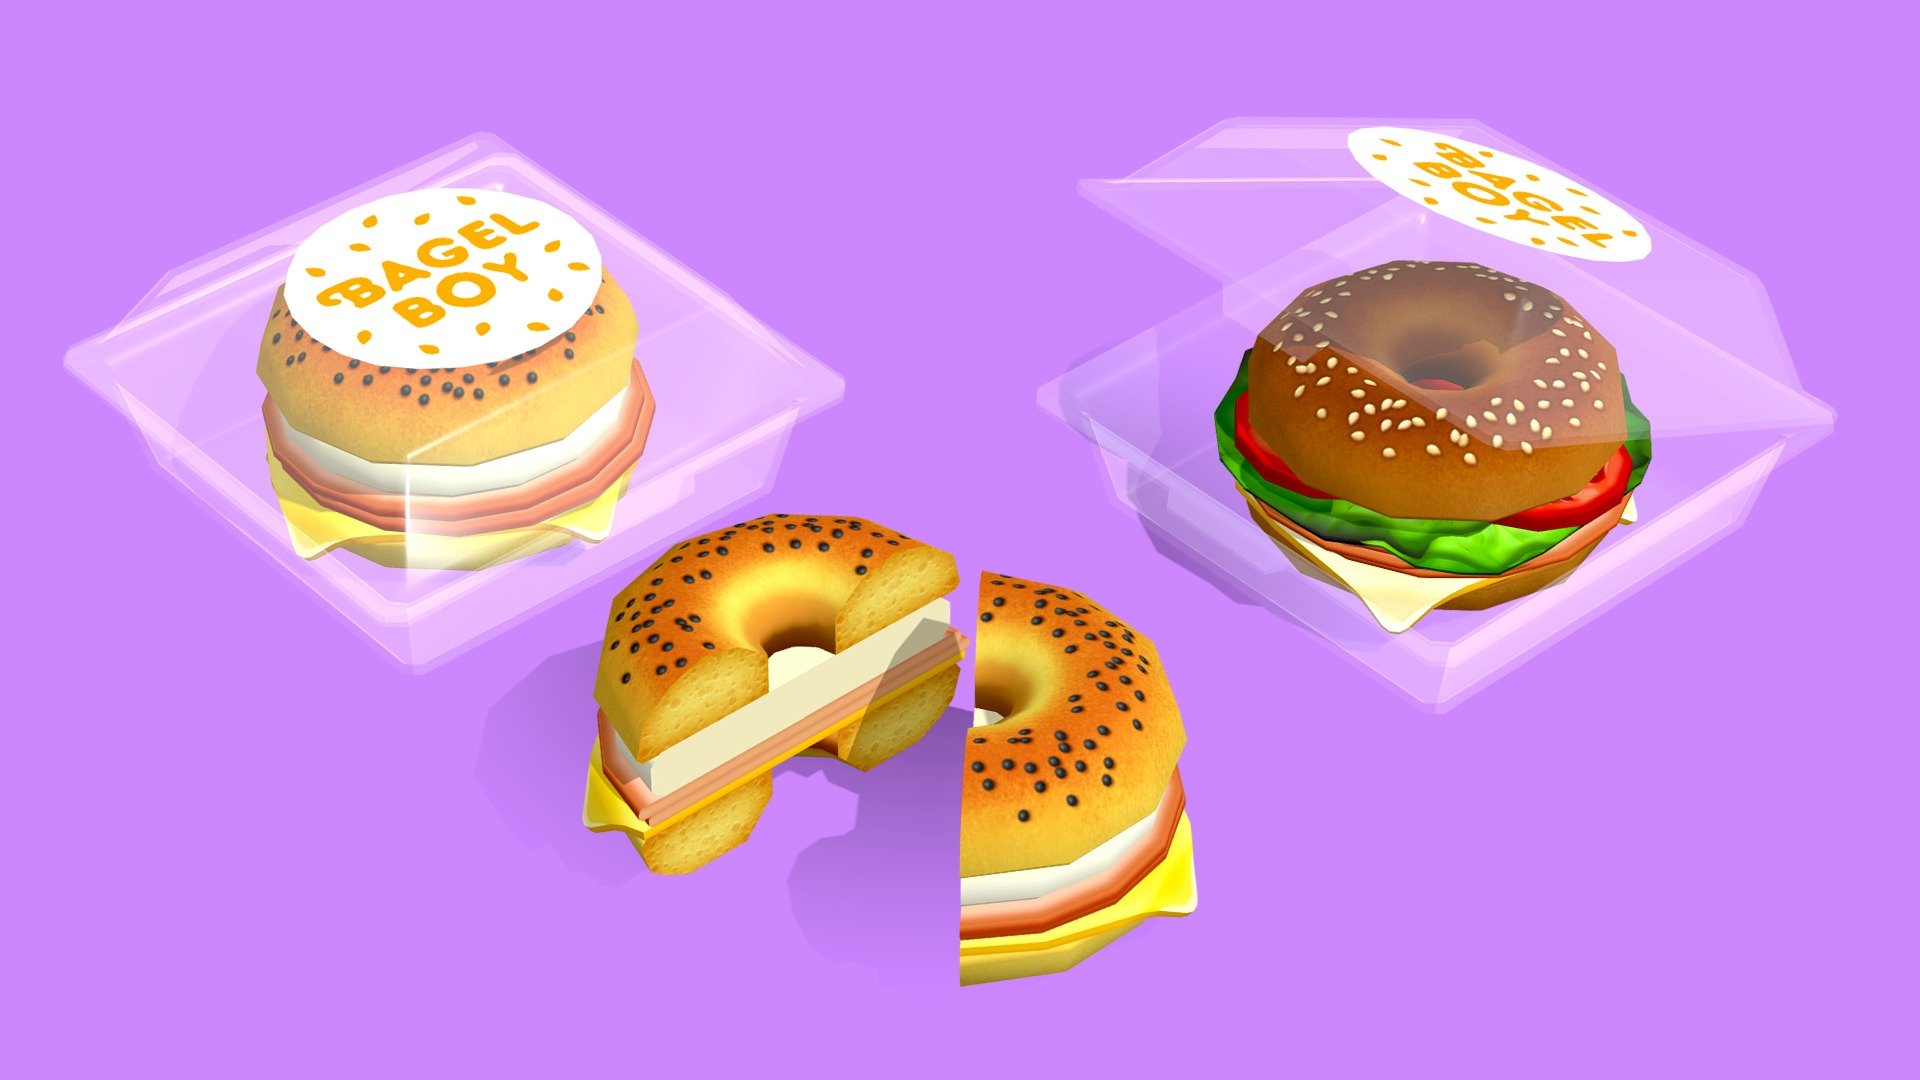 They're sandwiches with 50% more bread! The perfect addition to your next cafe or fast food game!




Two different kinds of bagel sandwiches to choose from - breakfast sandwich and deli sandwich 

Includes plastic sandwich container 

Each sandwich is comprised of two halves that perfectly snap into a whole sandwich - modular and customizable 

This asset uses a single 1024x1024 diffuse texture maps and can be used both lit and unlit - perfect for mobile! 

Modeled in Maya and painted in Photoshop.

While you’re here make sure to check out my other assets! They are all modeled and painted in the same style so your game or project will maintain a cohesive and unique style with a wide variety of assets to choose from! - Bagel Sandwiches - Buy Royalty Free 3D model by Megan Alcock (@citystreetlight) 3d model